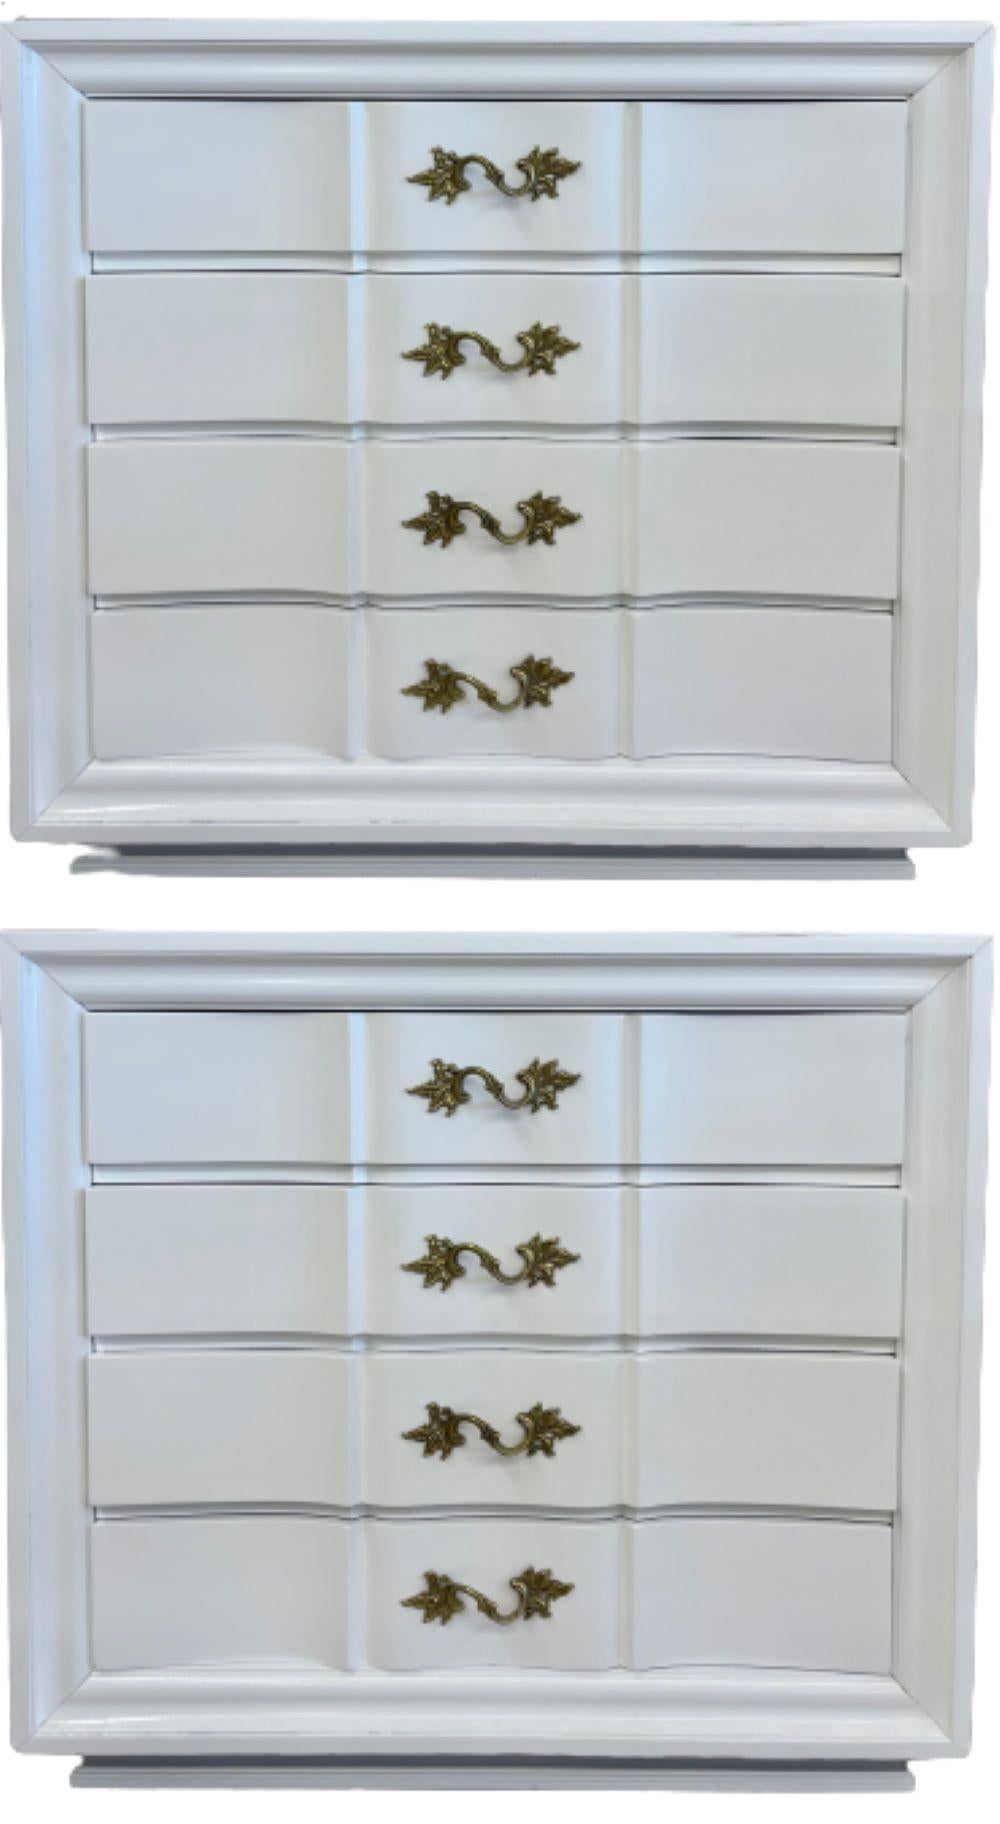 A pair of Hollywood Regency style white lacquered dressers or commode or chest. Each of these multiple use chests or nightstands have been recently refinished. The pair have solid bronze pulls on all four double curved front drawers sitting on a